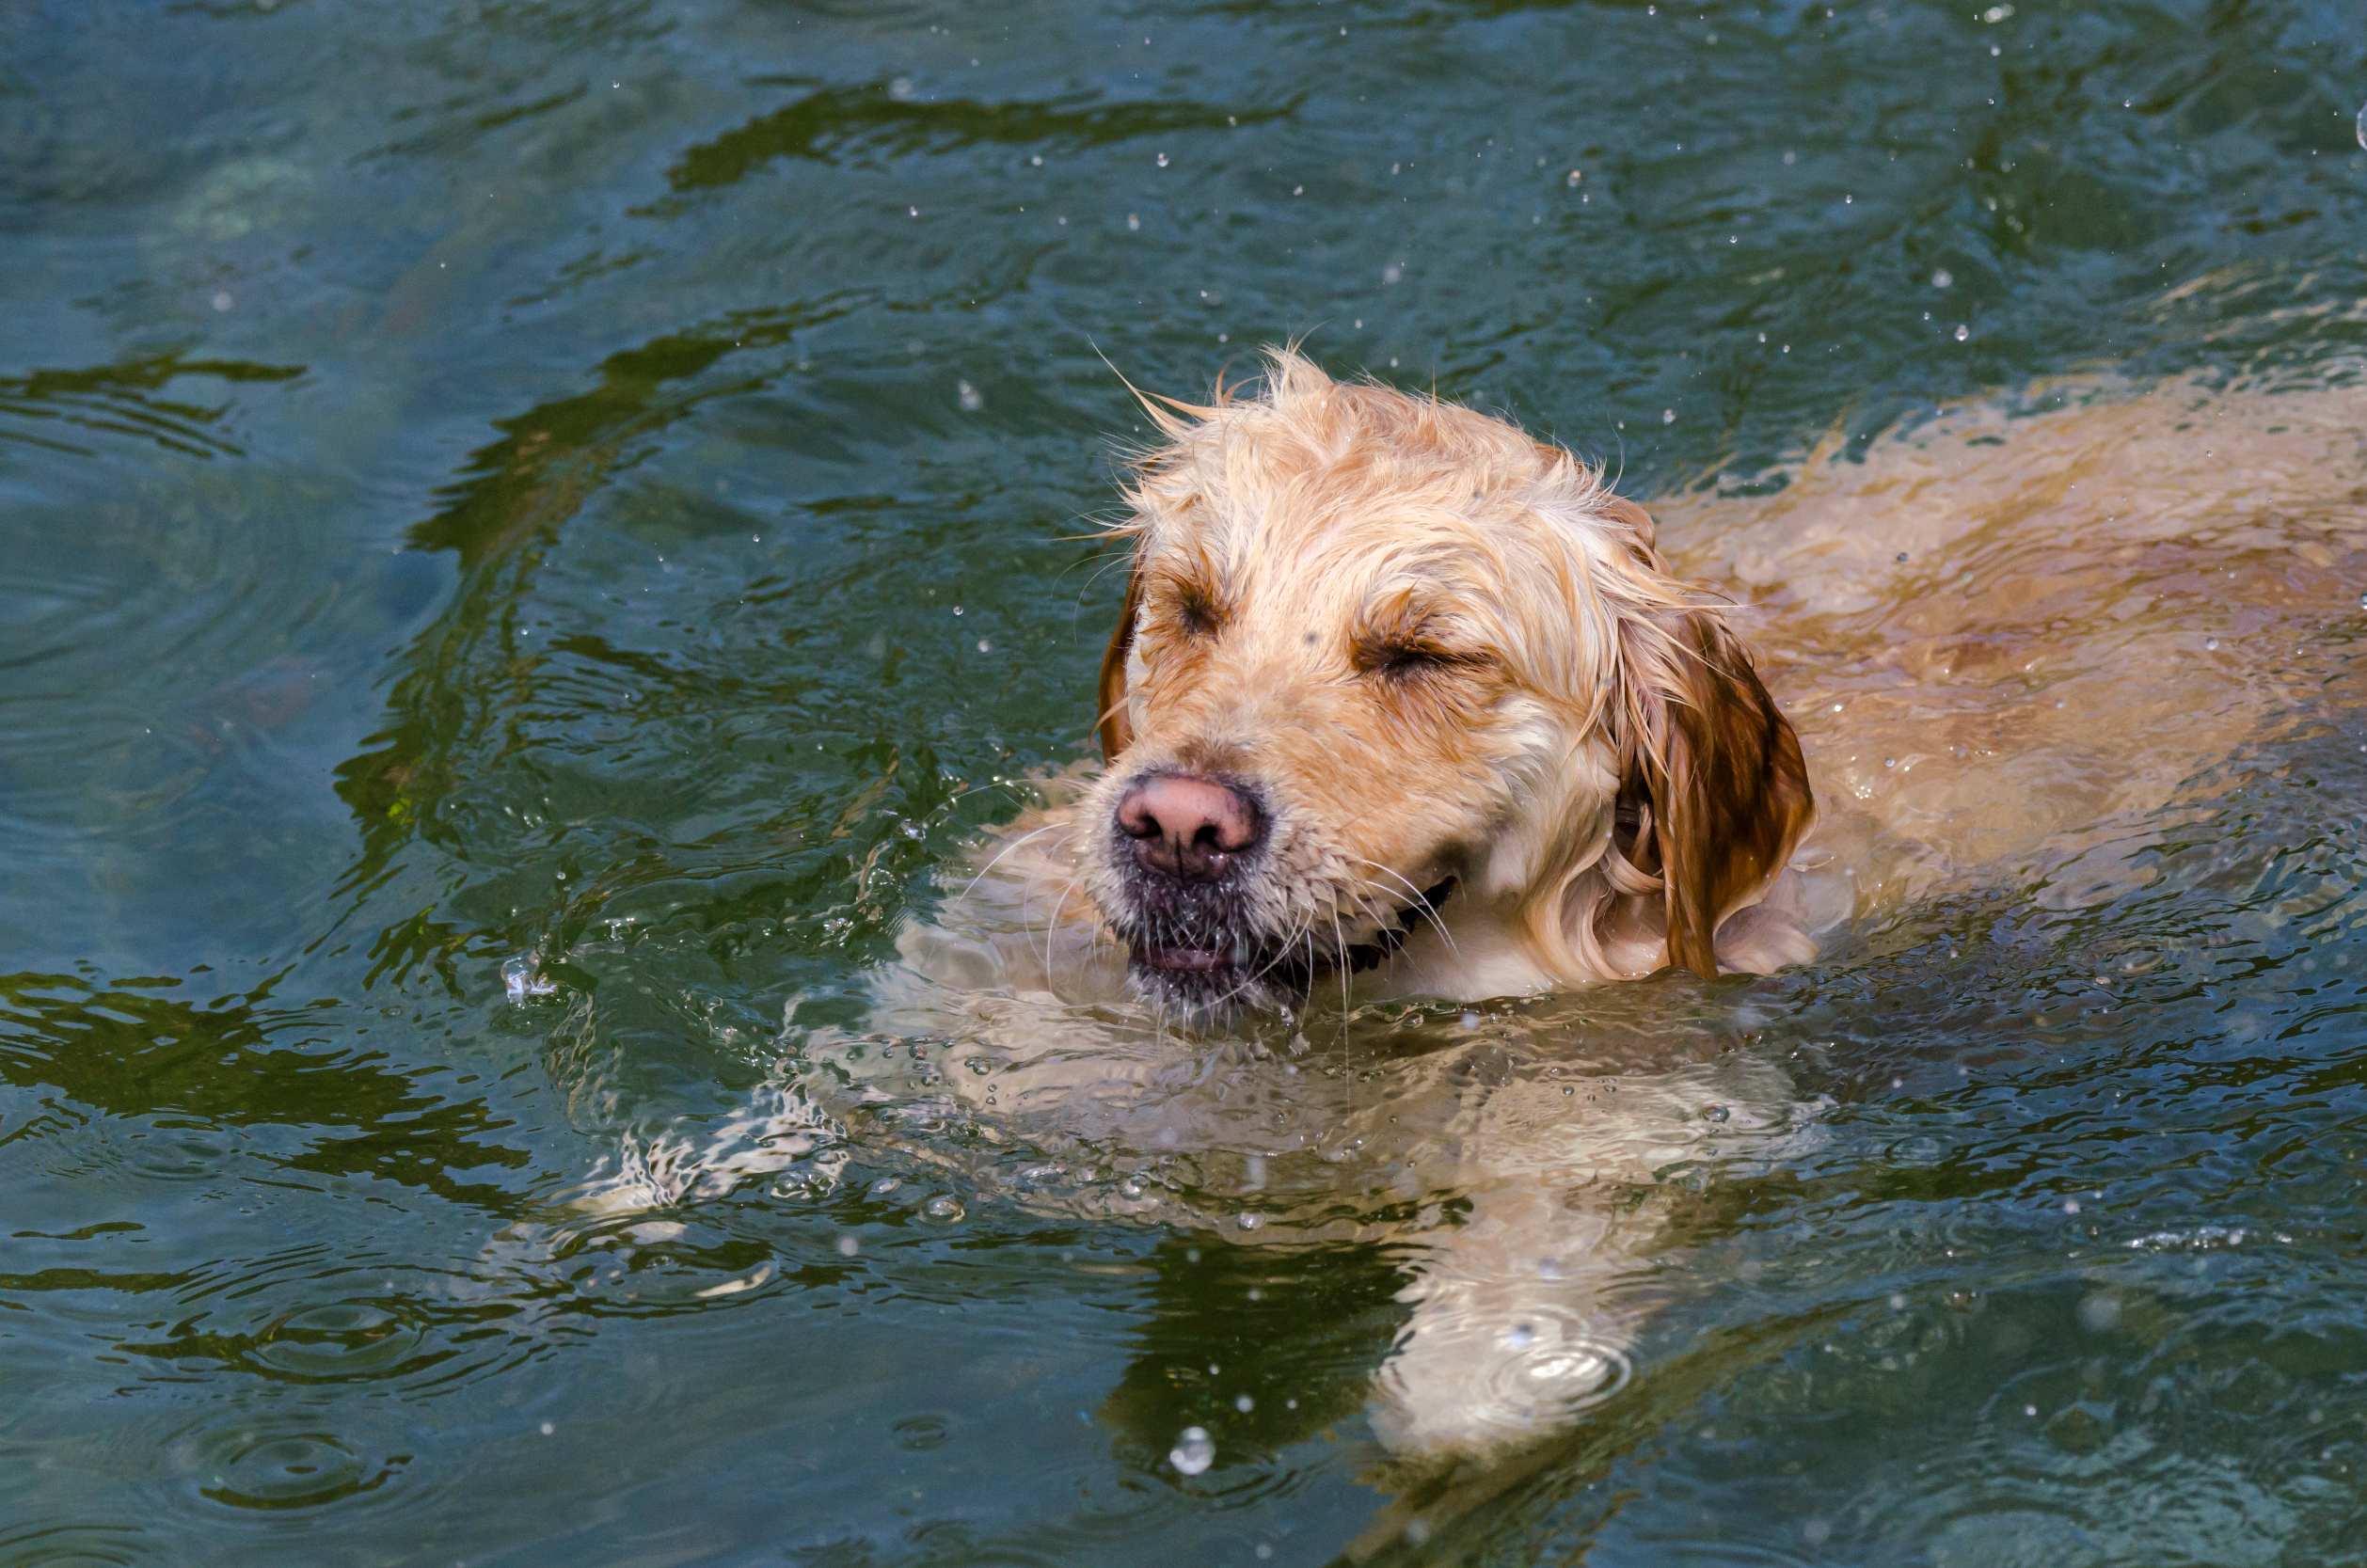 Hydropool for Dogs